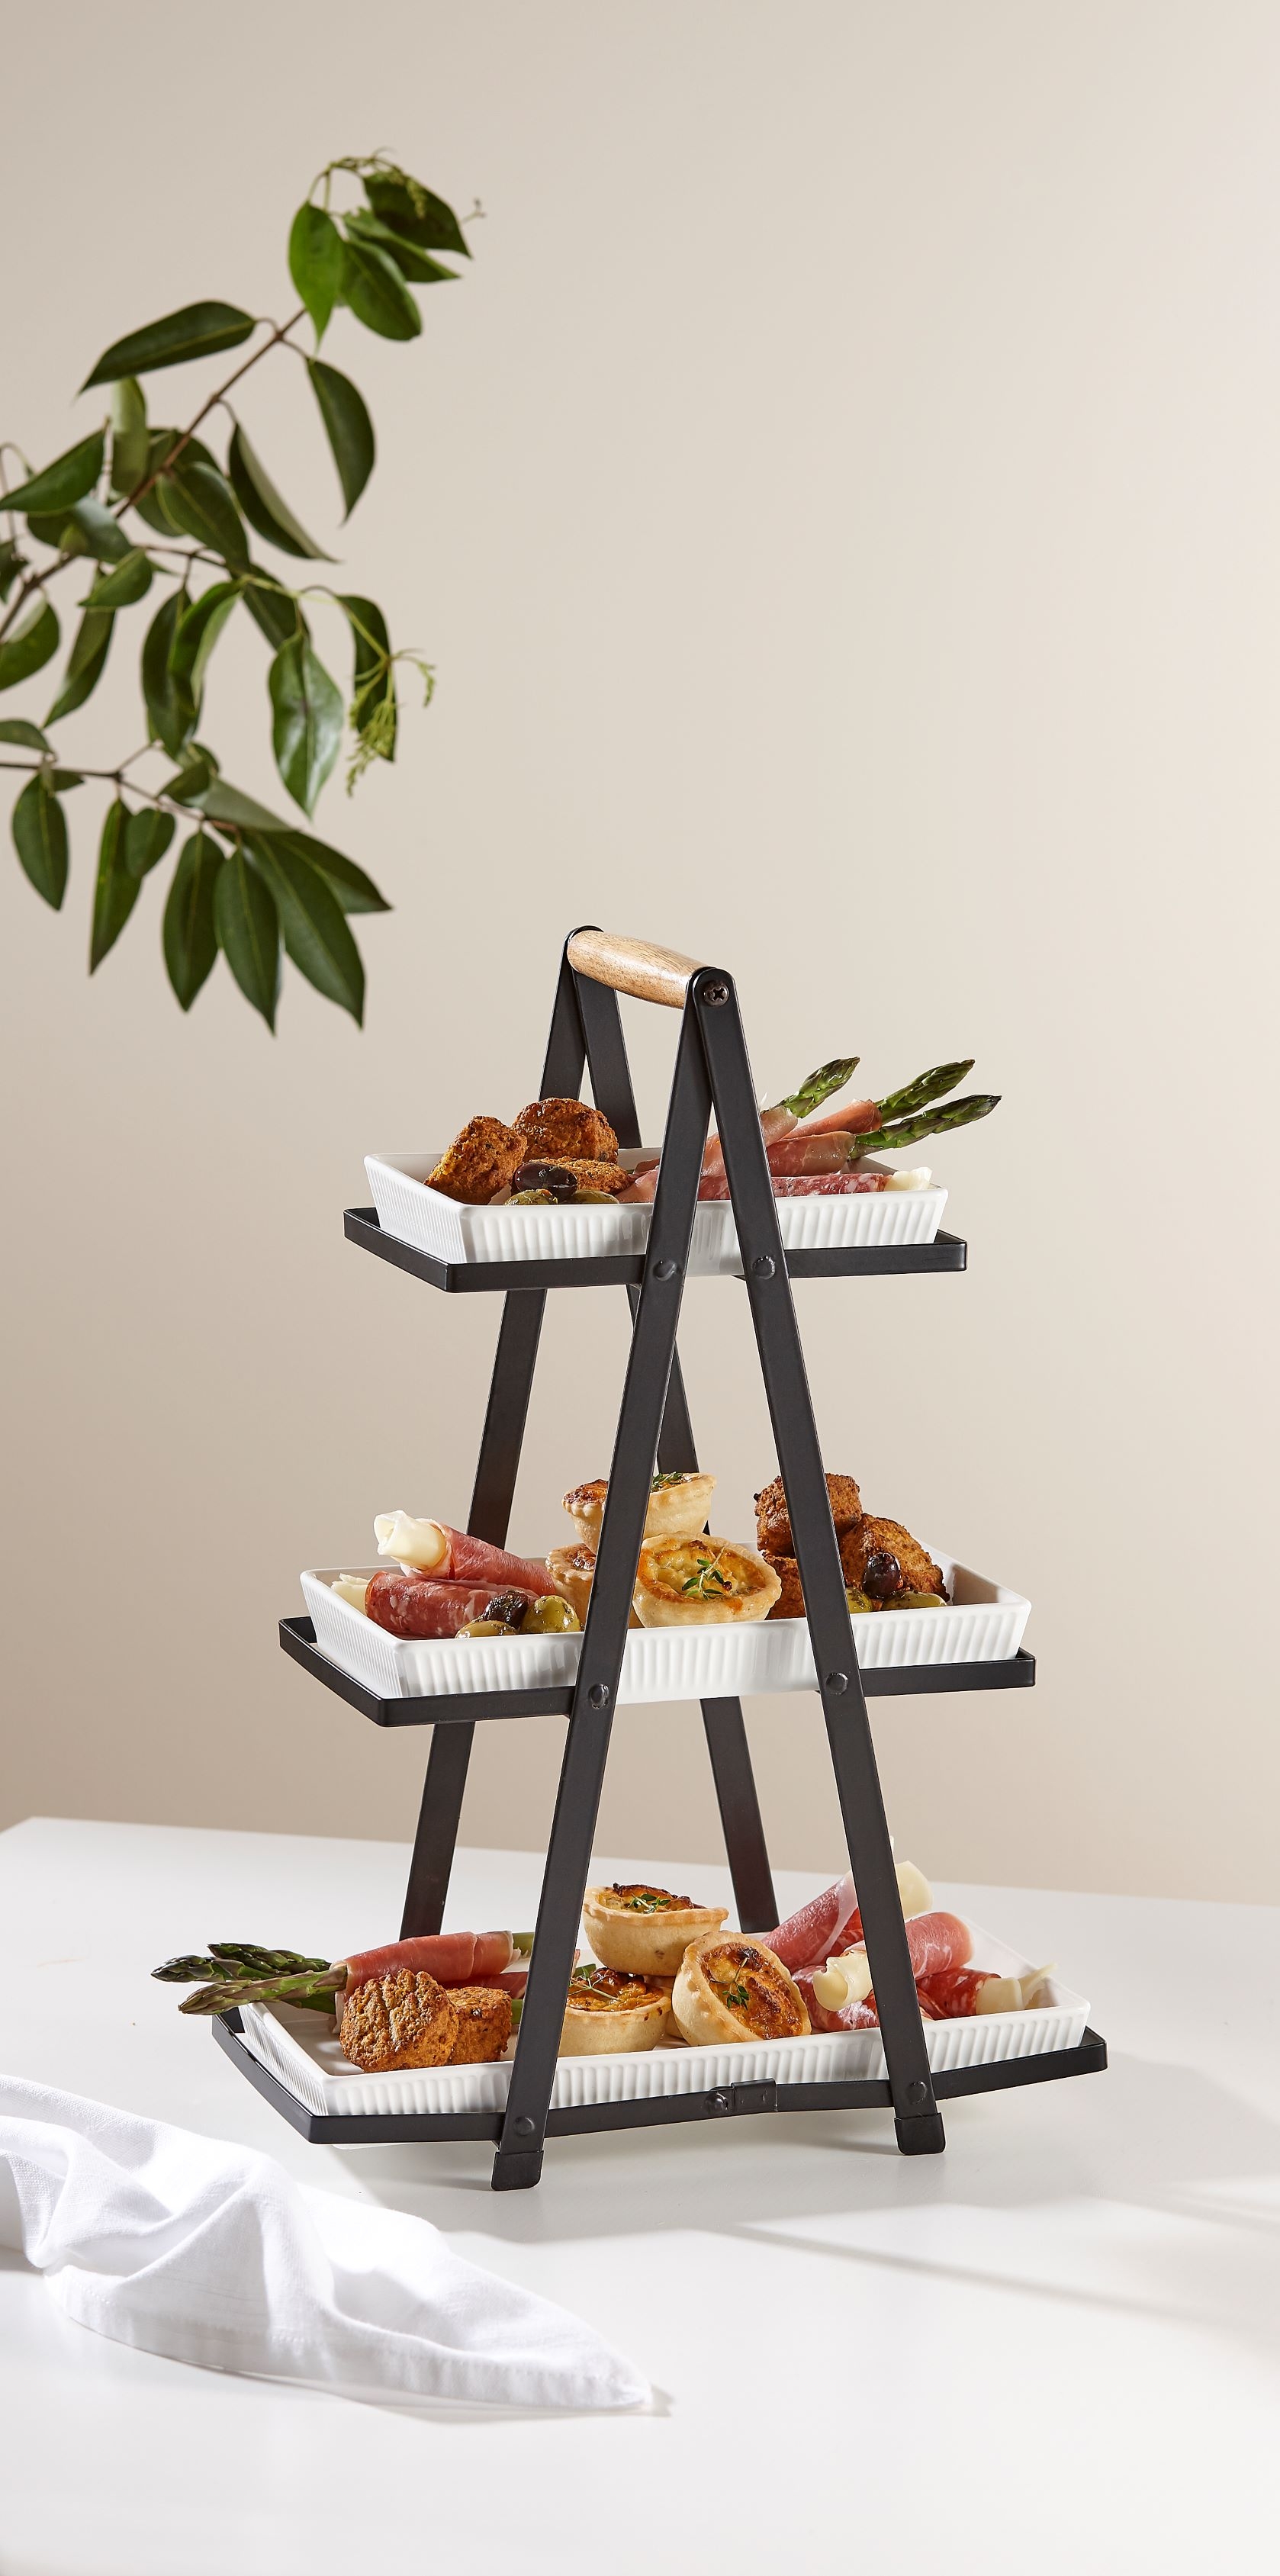 Ladelle Classica Serving Tower 3 Tier